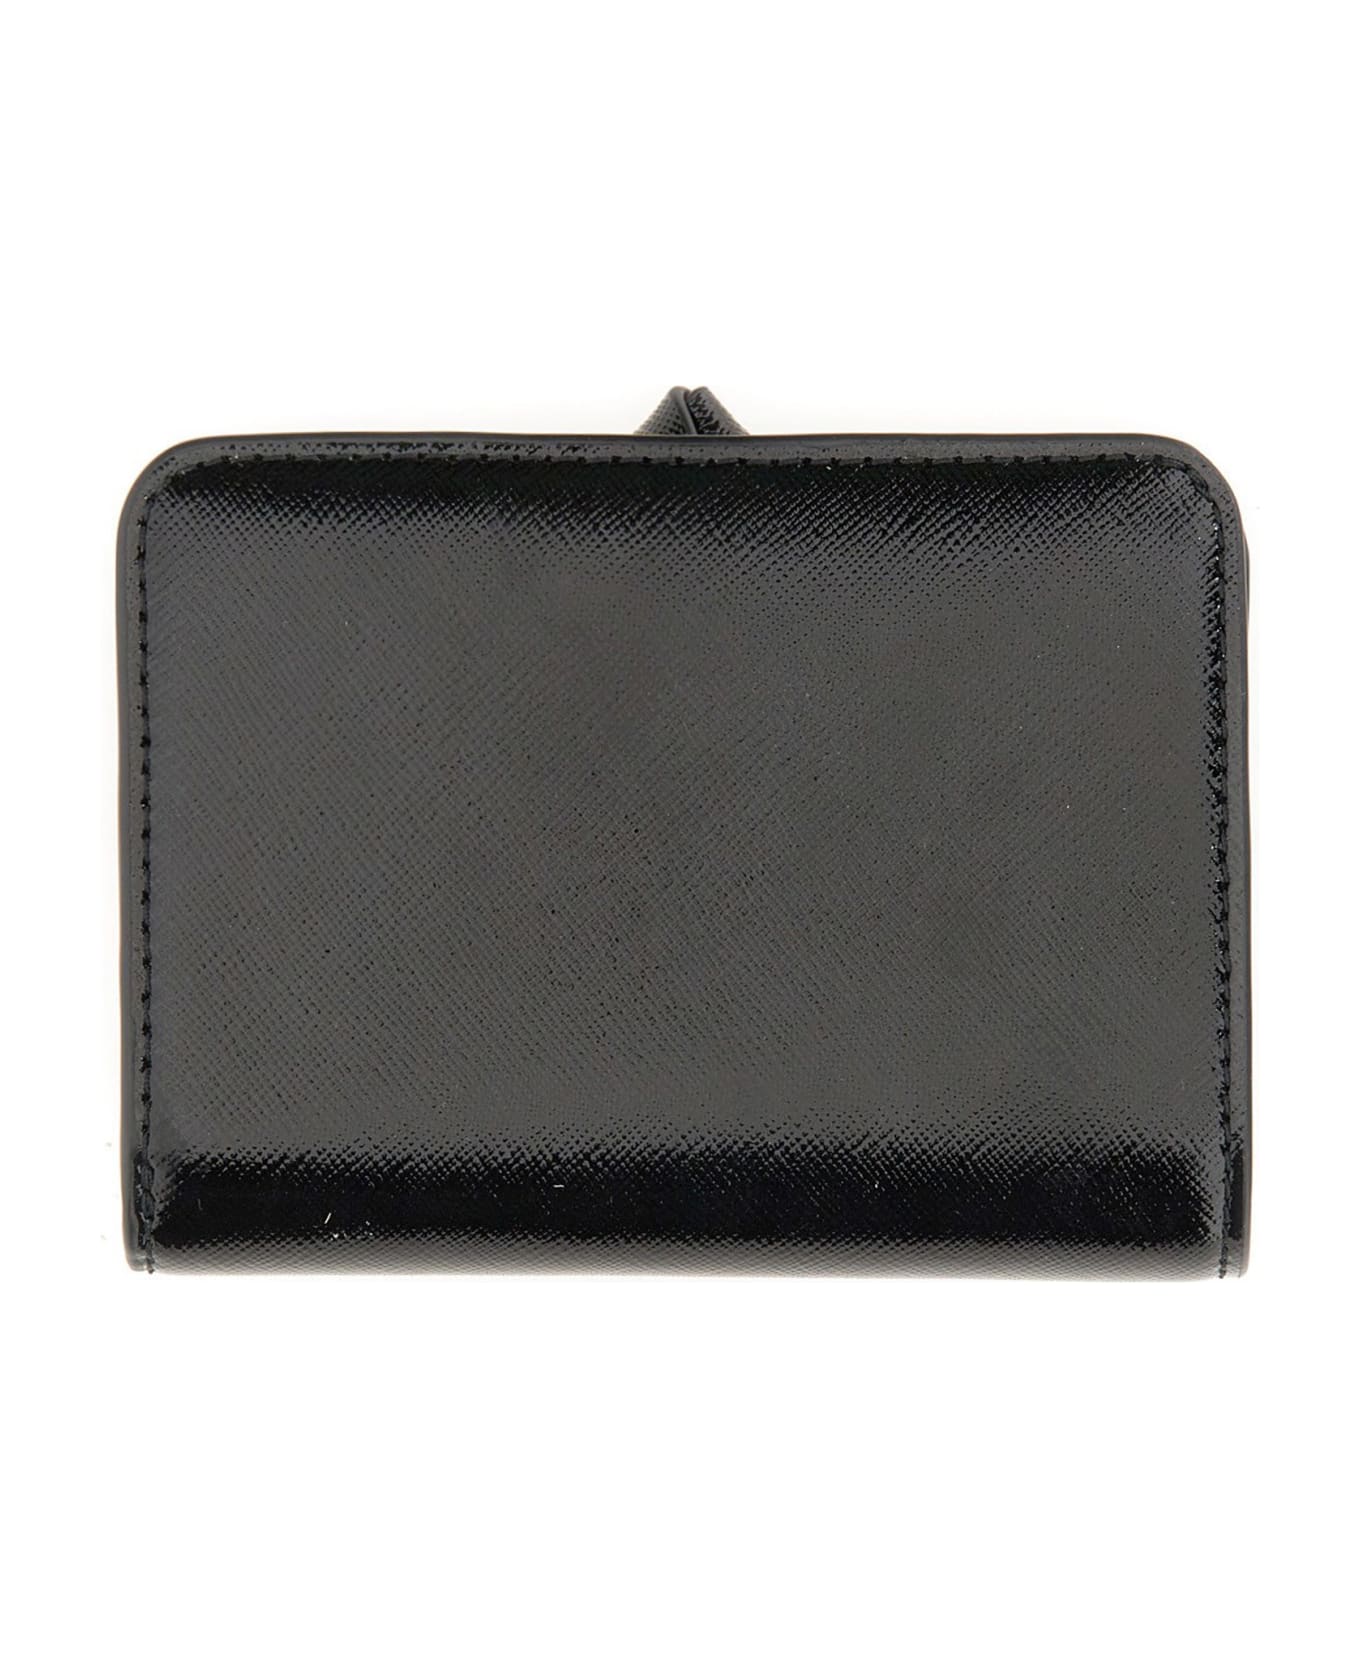 Marc Jacobs The Mini Compact Wallet In Black Leather - BLACK 財布